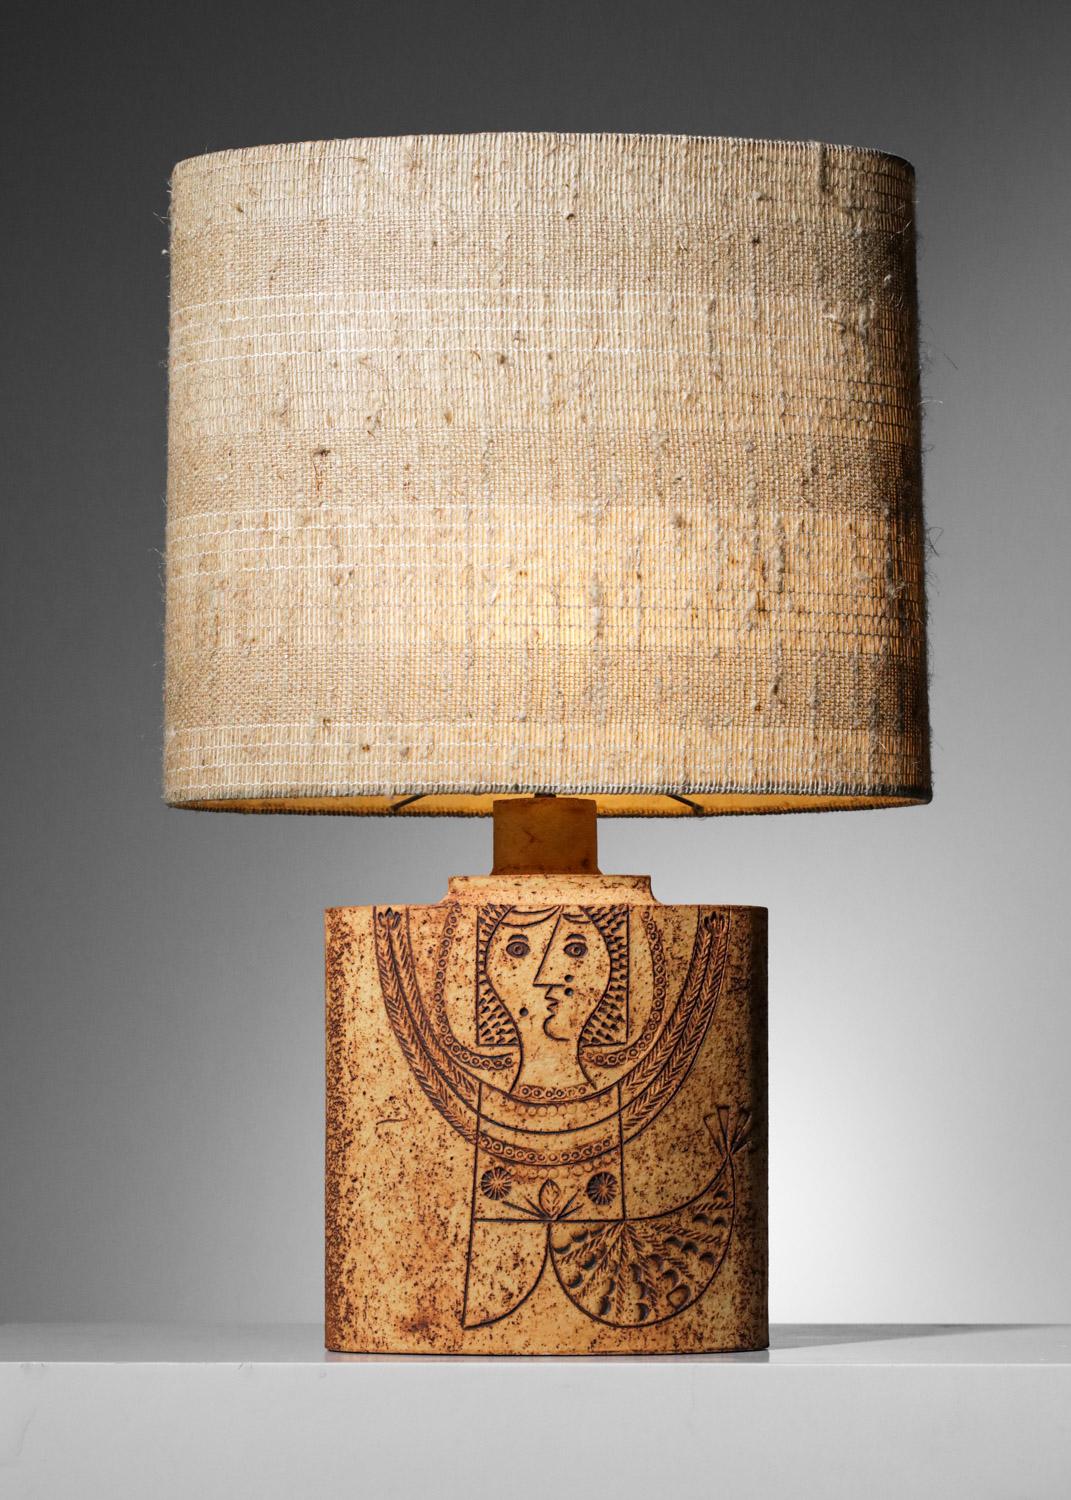 Beautiful table lamp from the 60's by Roger Capron made in collaboration with Jean Derval. Structure of the base of the lamp in chamotte clay, decoration imagined by Jean Derval representing a stylized mermaid woman. Original woven lampshade,